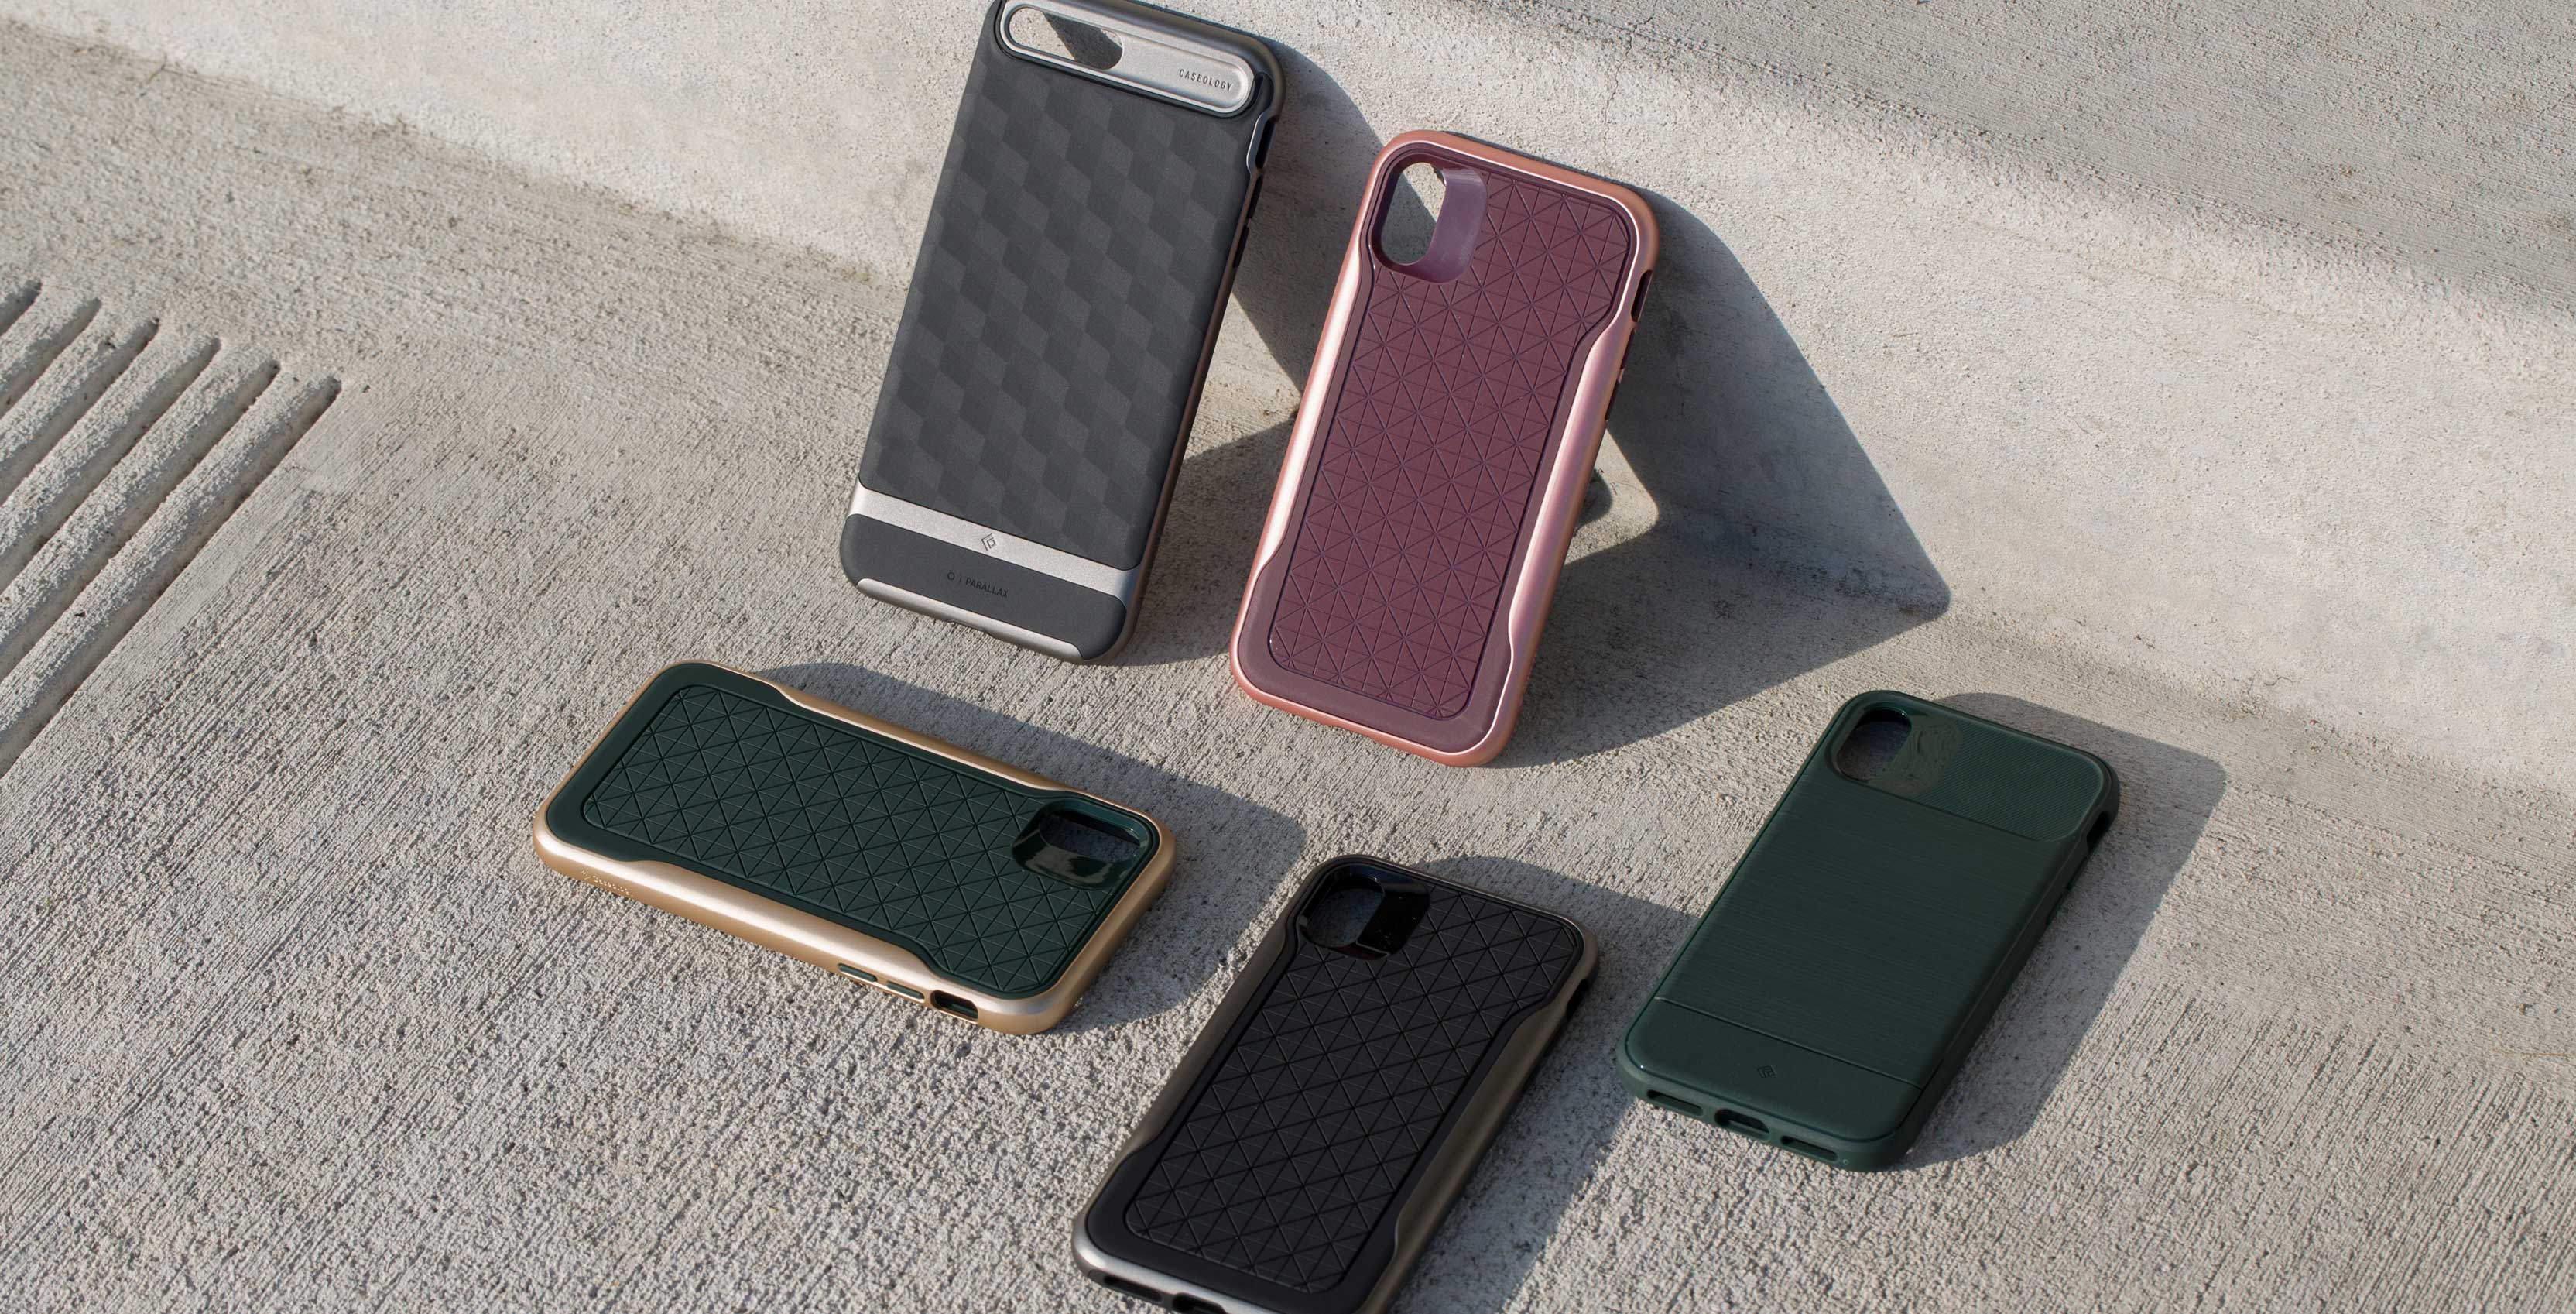 Caseology iPhone cases